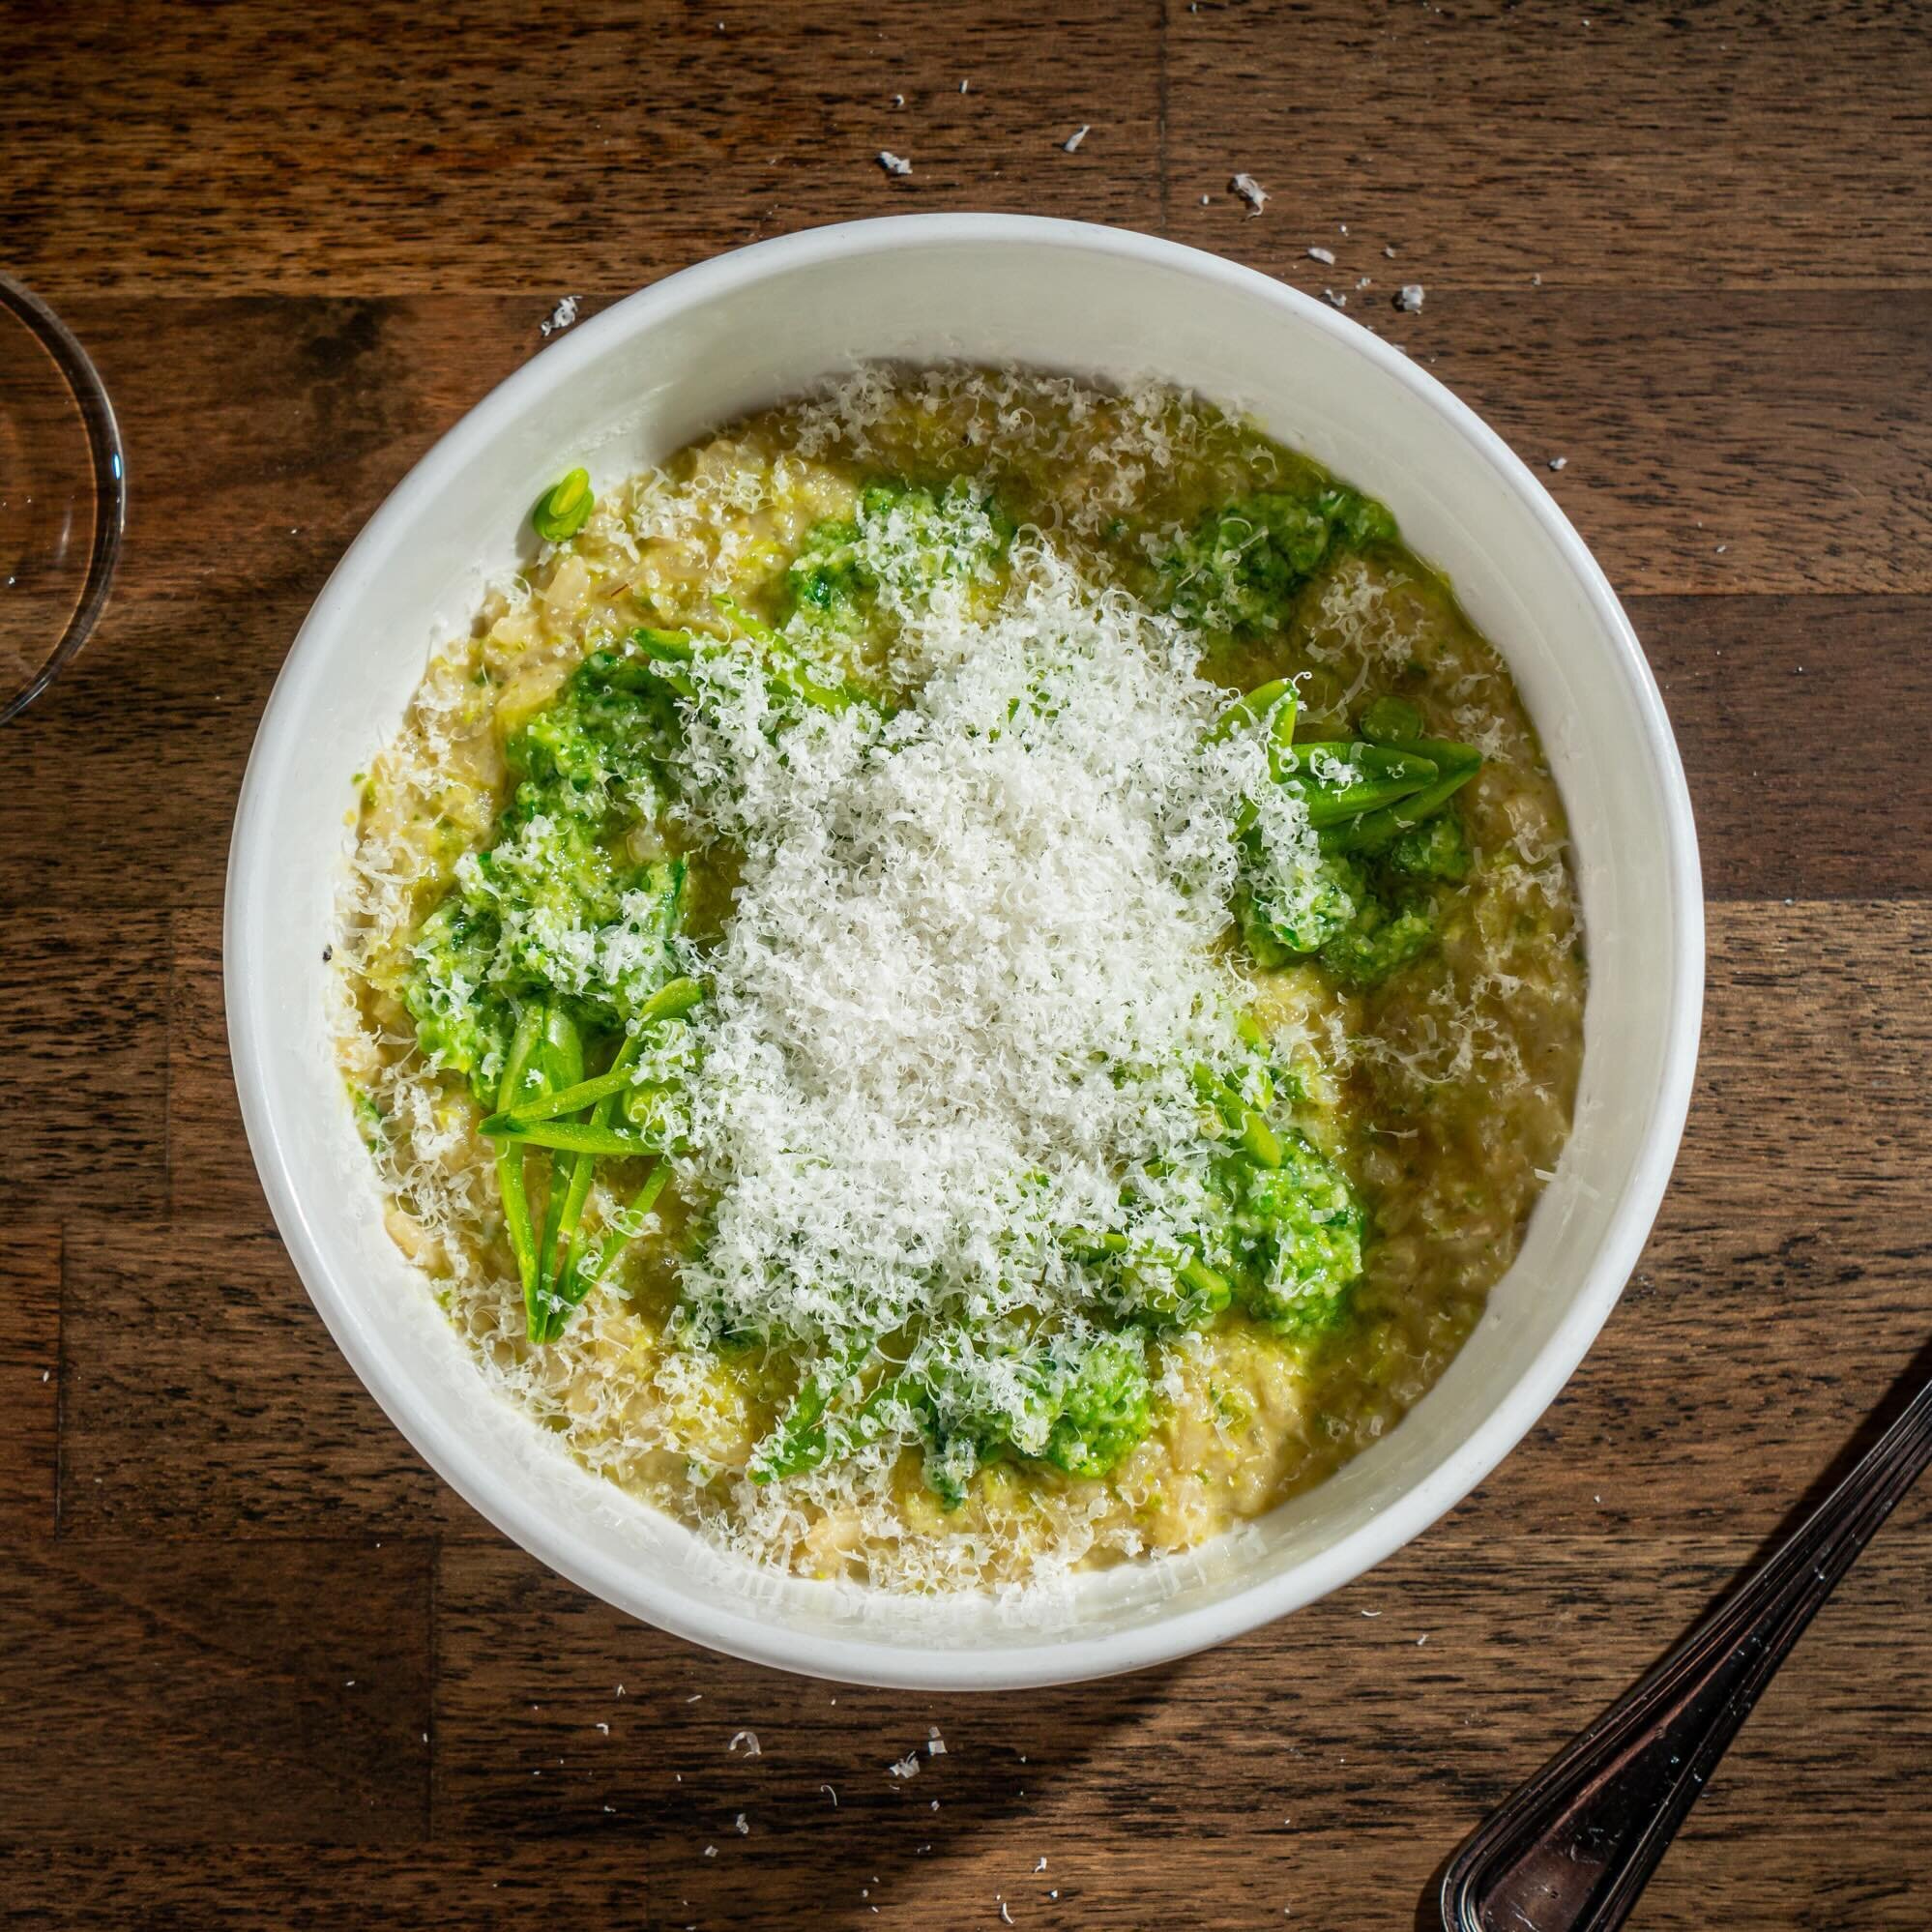 Spring is in full bloom at Virginia&rsquo;s 💐 Welcome the latest addition to our menu, a Spring Pea risotto with parmesan and mint! 🫛✨🍽️ #virginiasnyc 

📸: @noahfecksisawesome